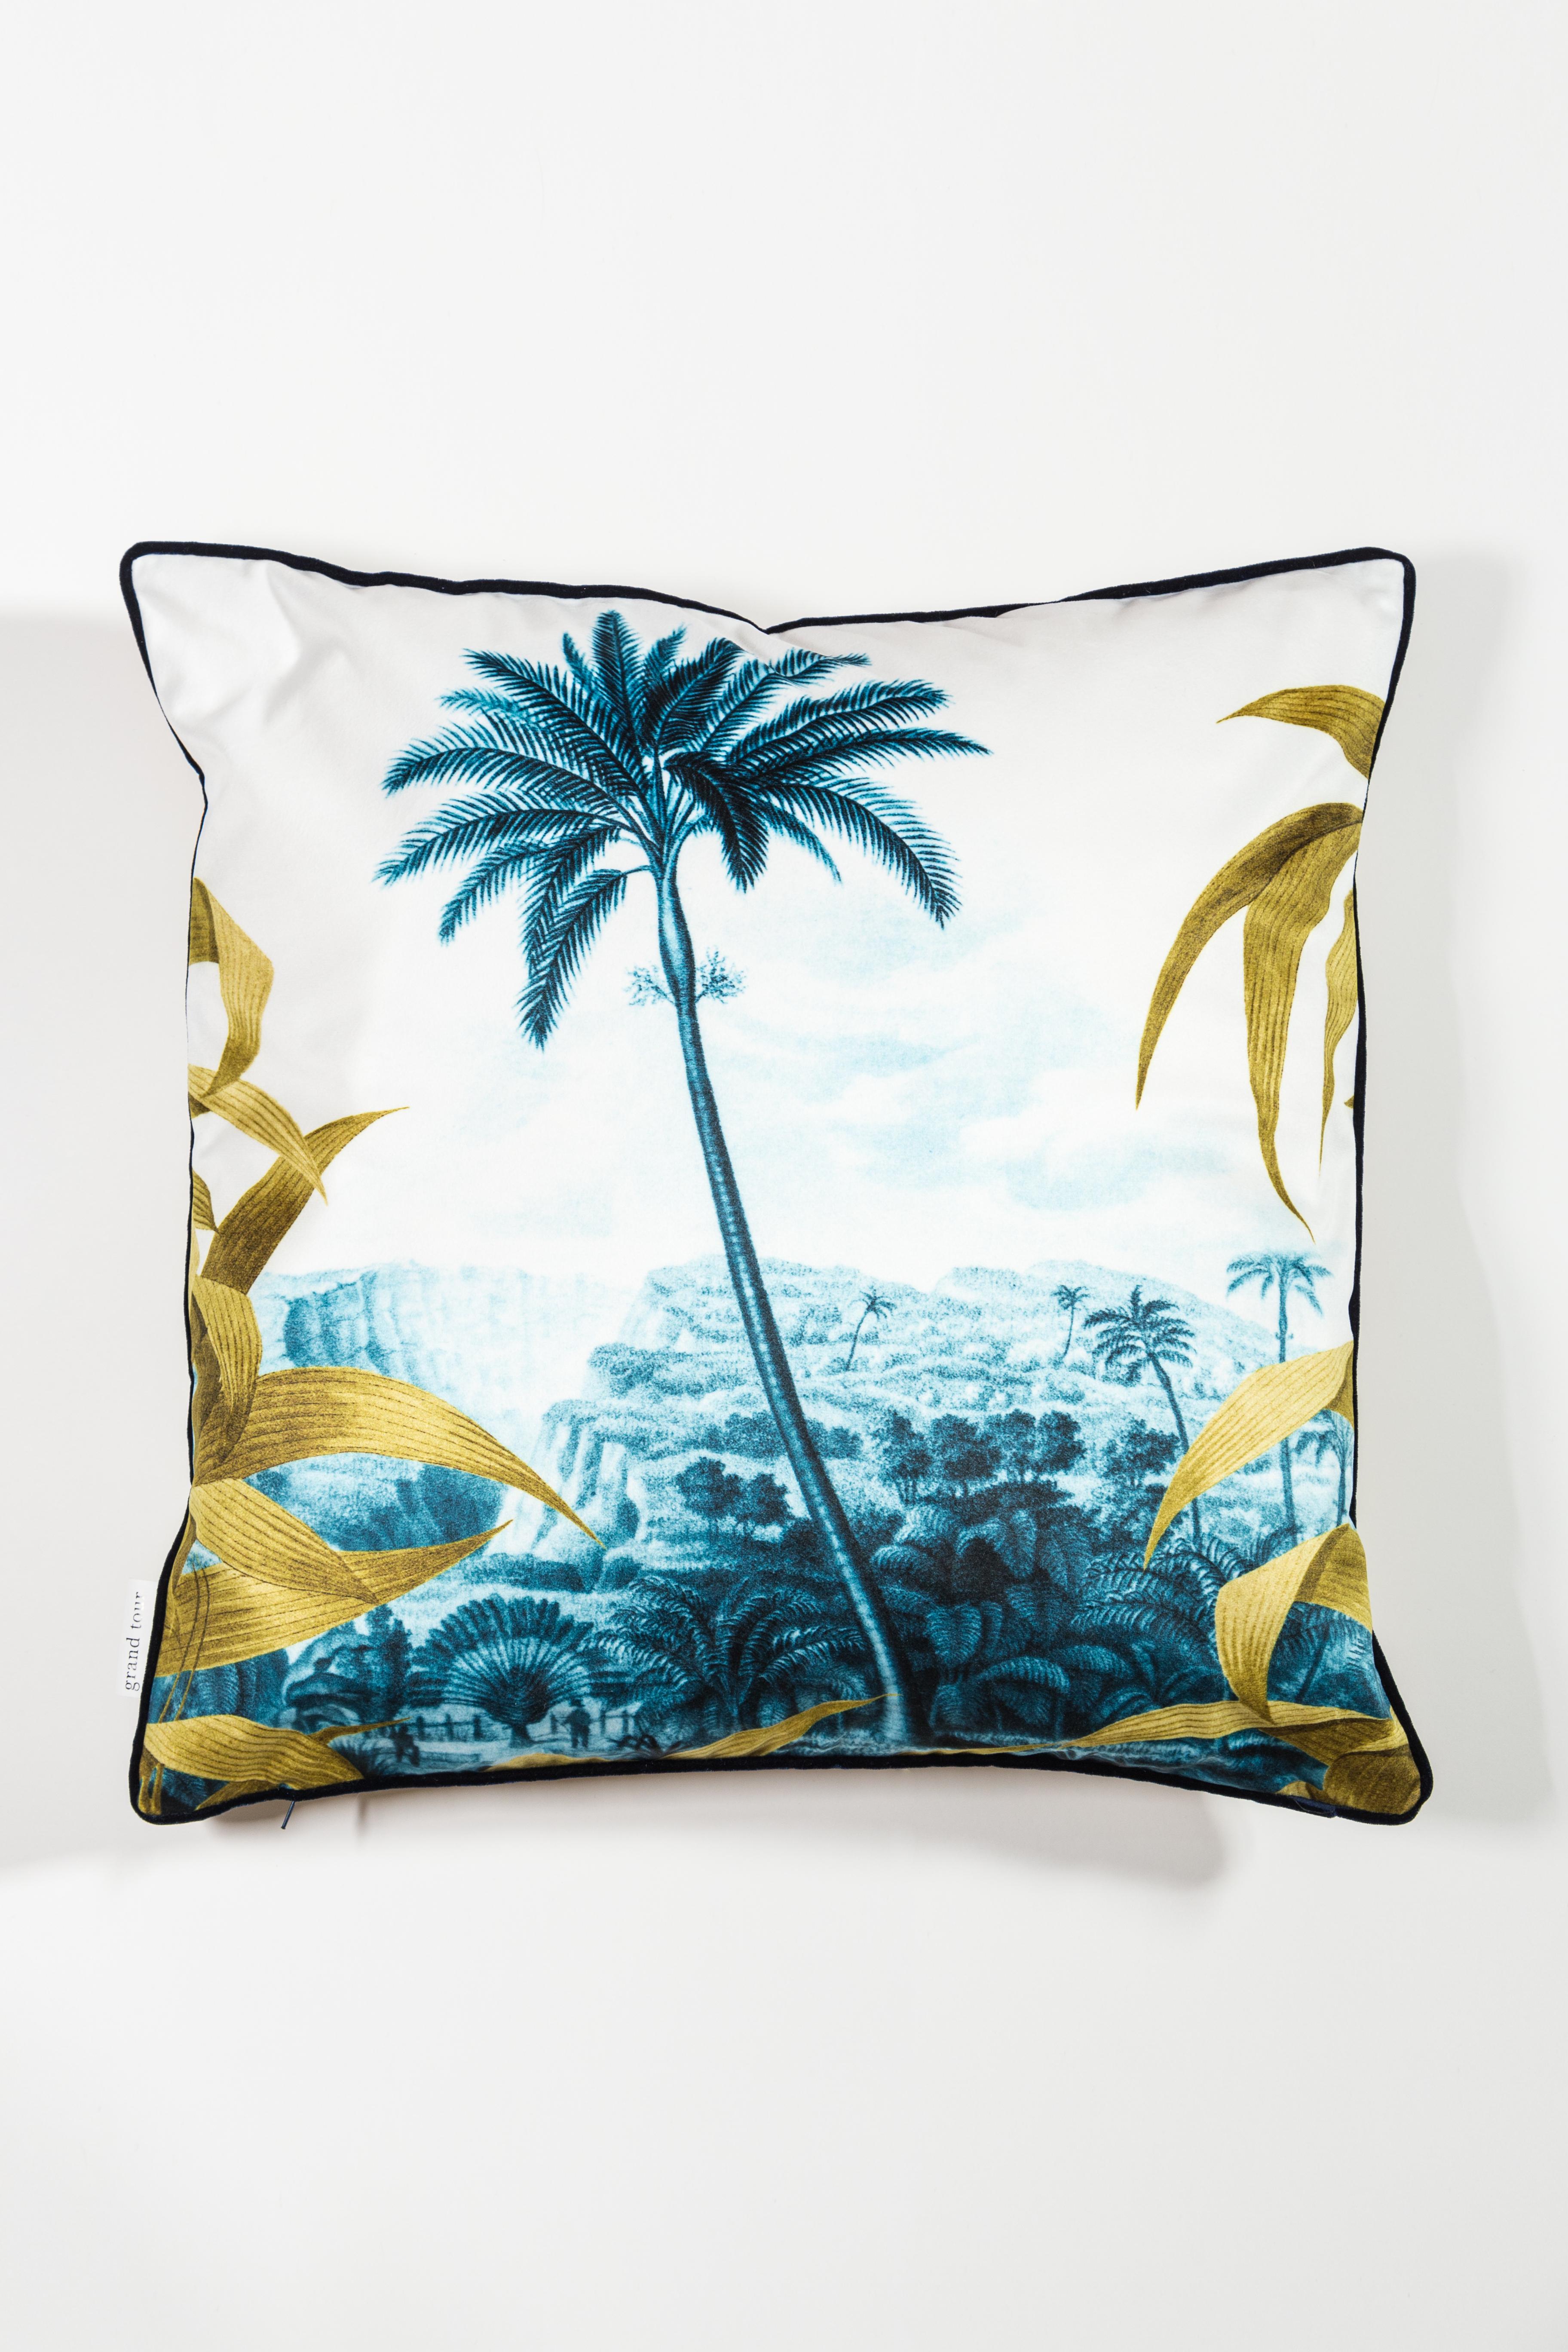 Las Palmas pillows is a set of cushions that evoke the tropical world with illustrations of landscapes near the city of Las Palmas, in the colors of petrol blue, framed by ocher palm leaves. The back is ocher and the edge, also in velvet, is